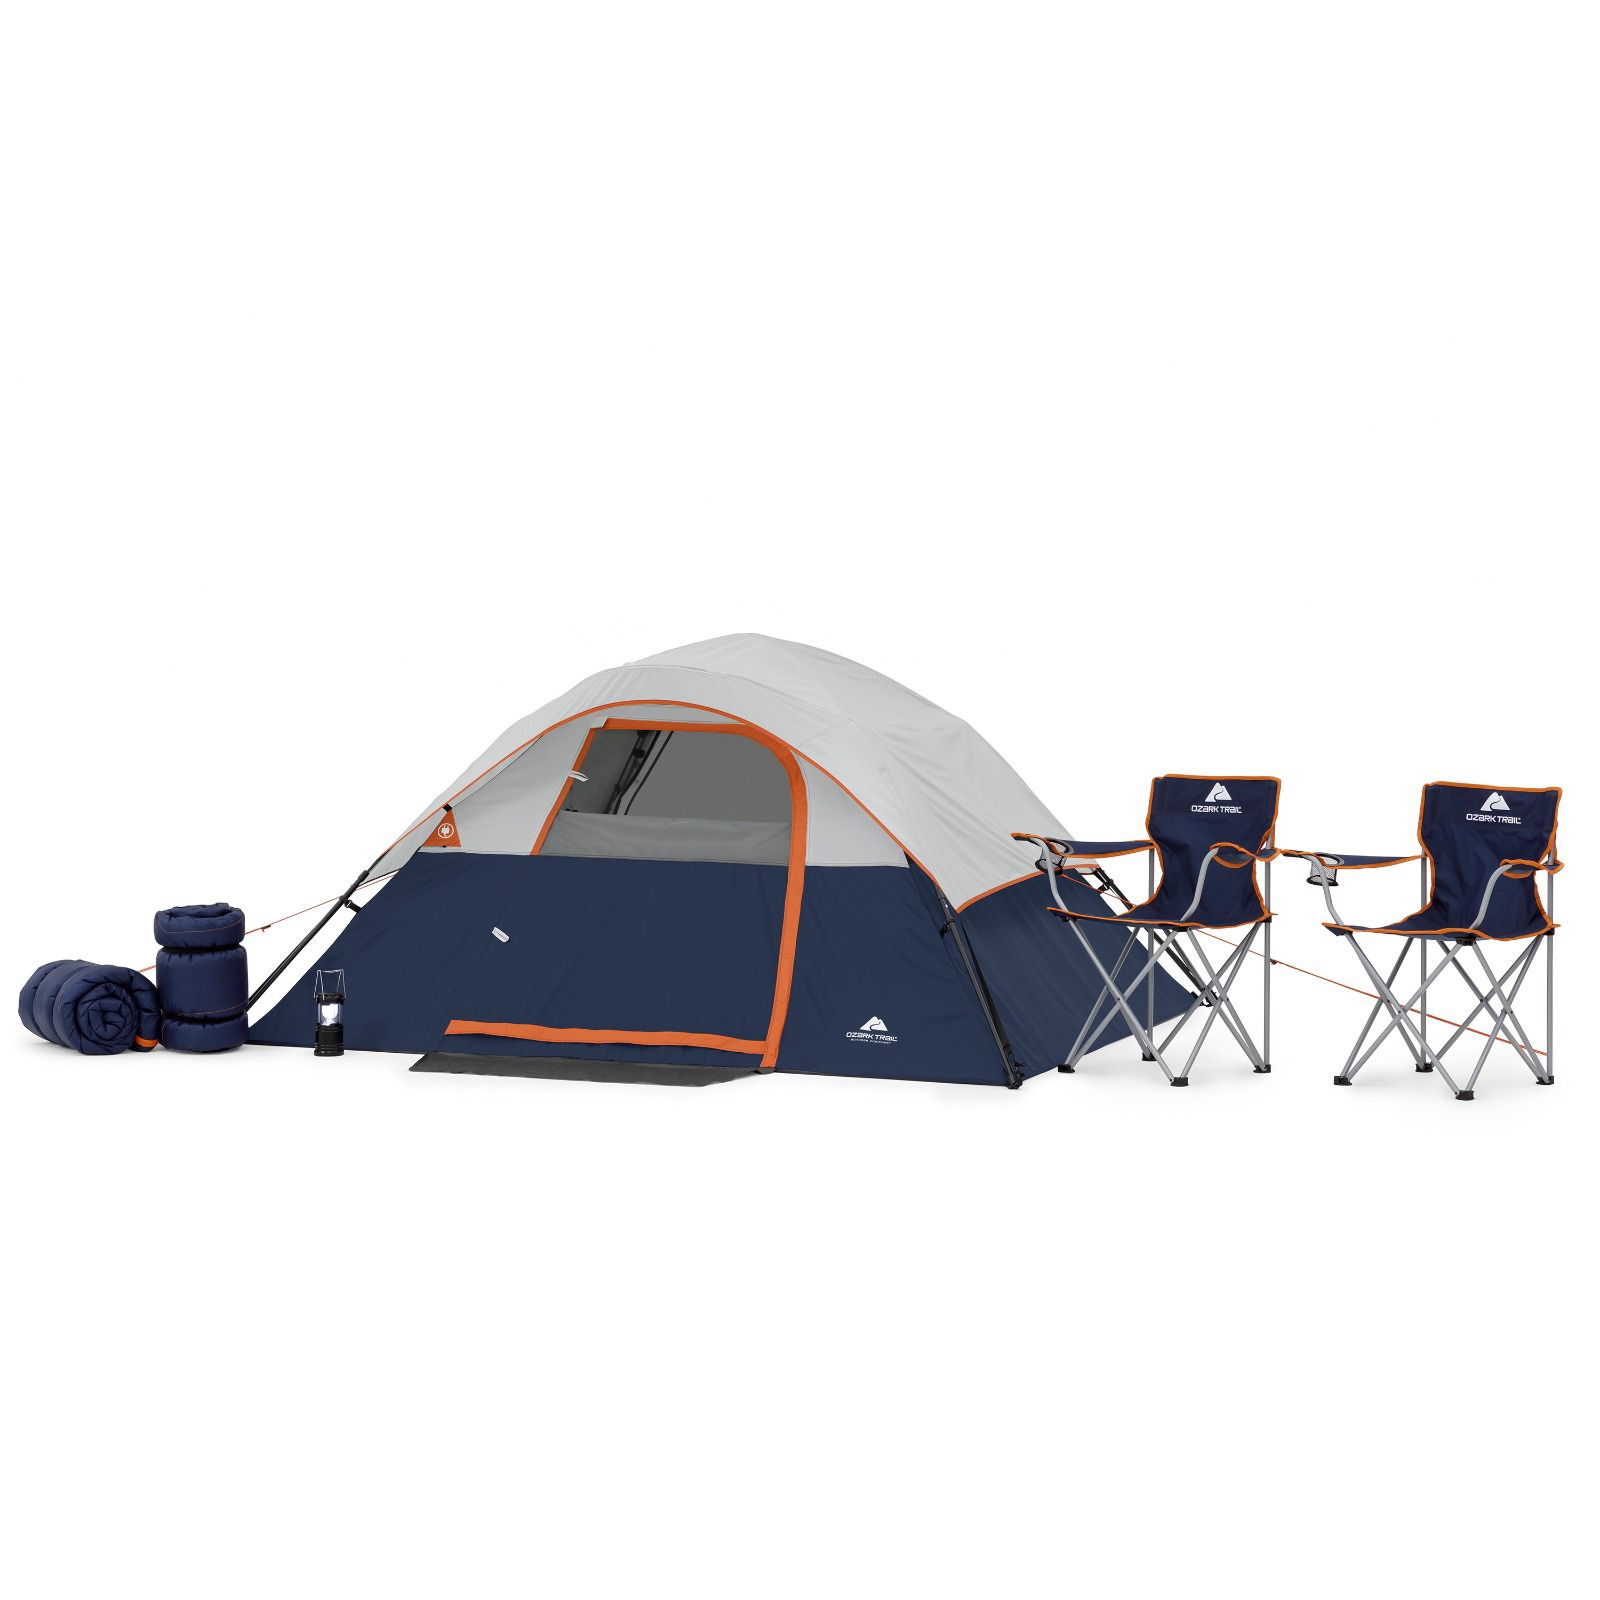 Title: Ozark Trail 6 Piece Camping Combo Description: Includes: 4-person instant tent, two foldable chairs, two sleeping bags and a collapsible LED La